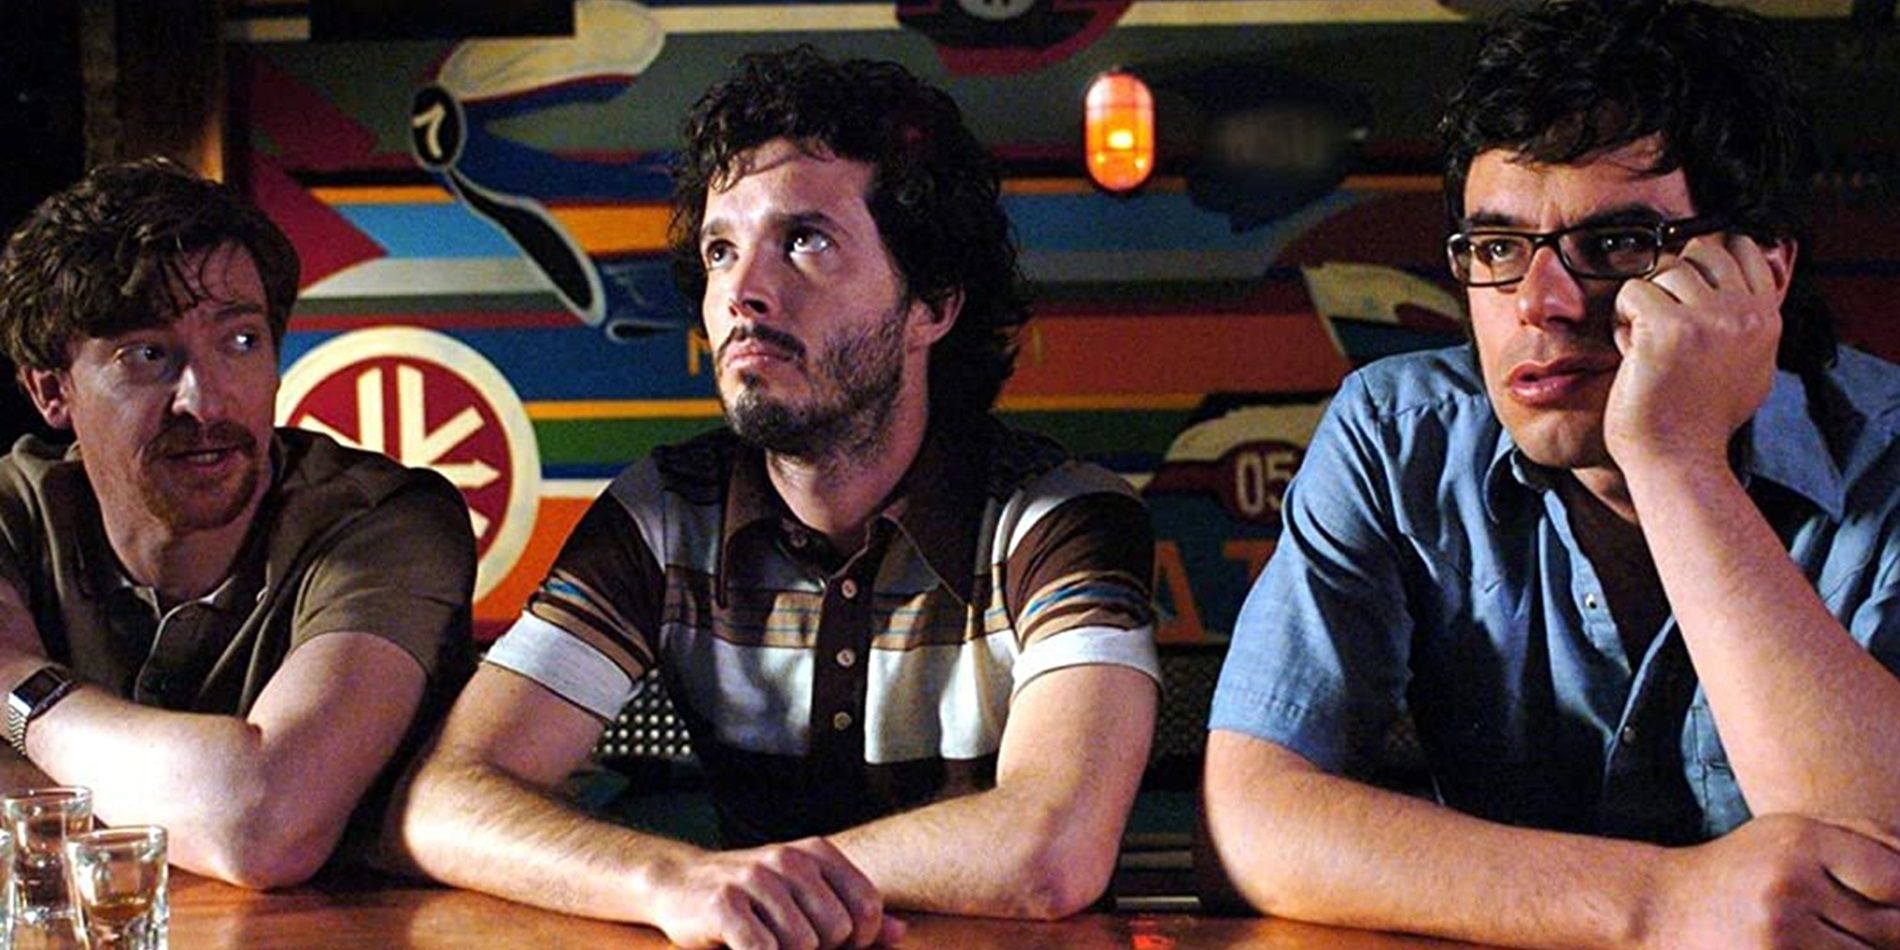 Jermaine and Bret in Flight of the Conchords